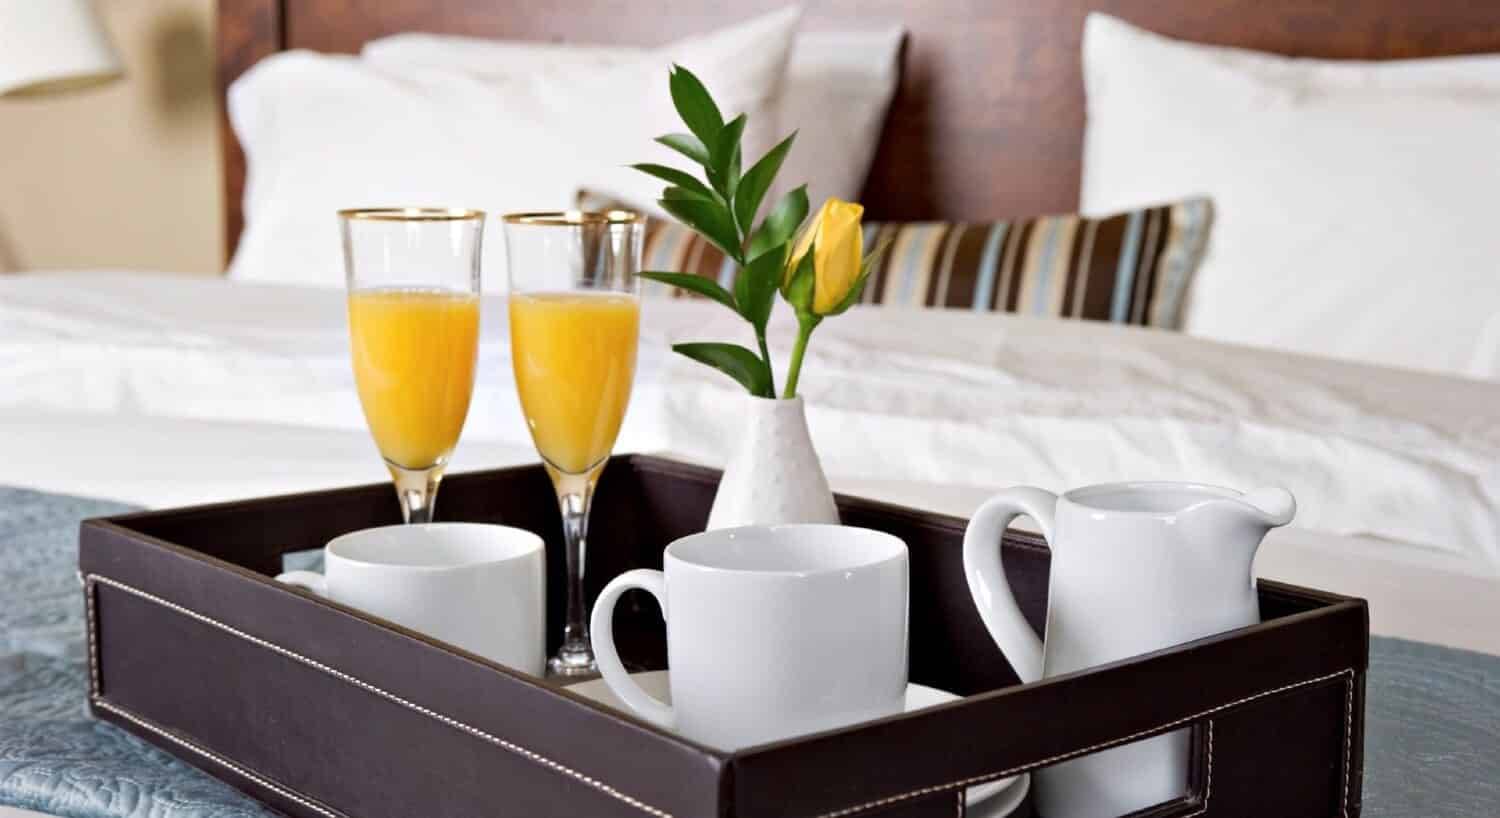 Brown leather tray on a bed holding two flutes of orange juice, two white coffee mugs and a creamer